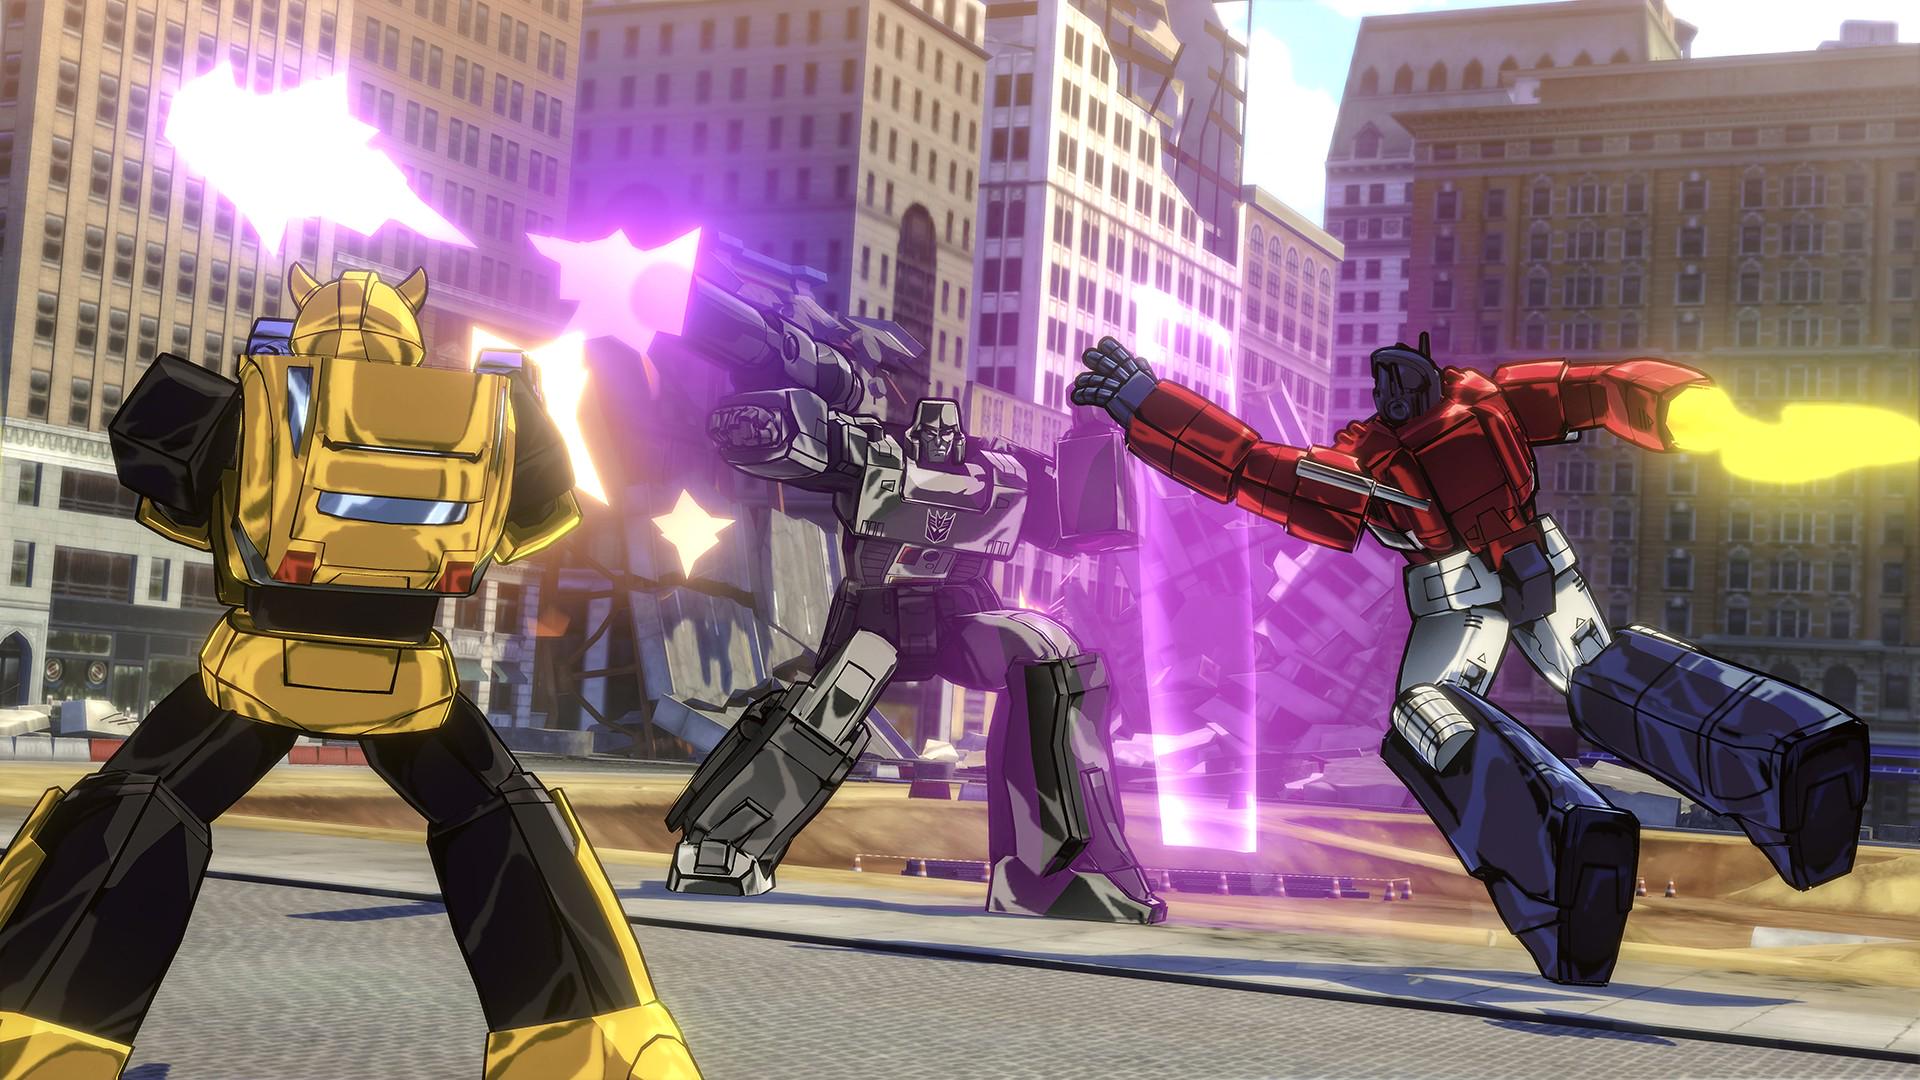 Activision TRANSFORMERS: Devastation from Activision and